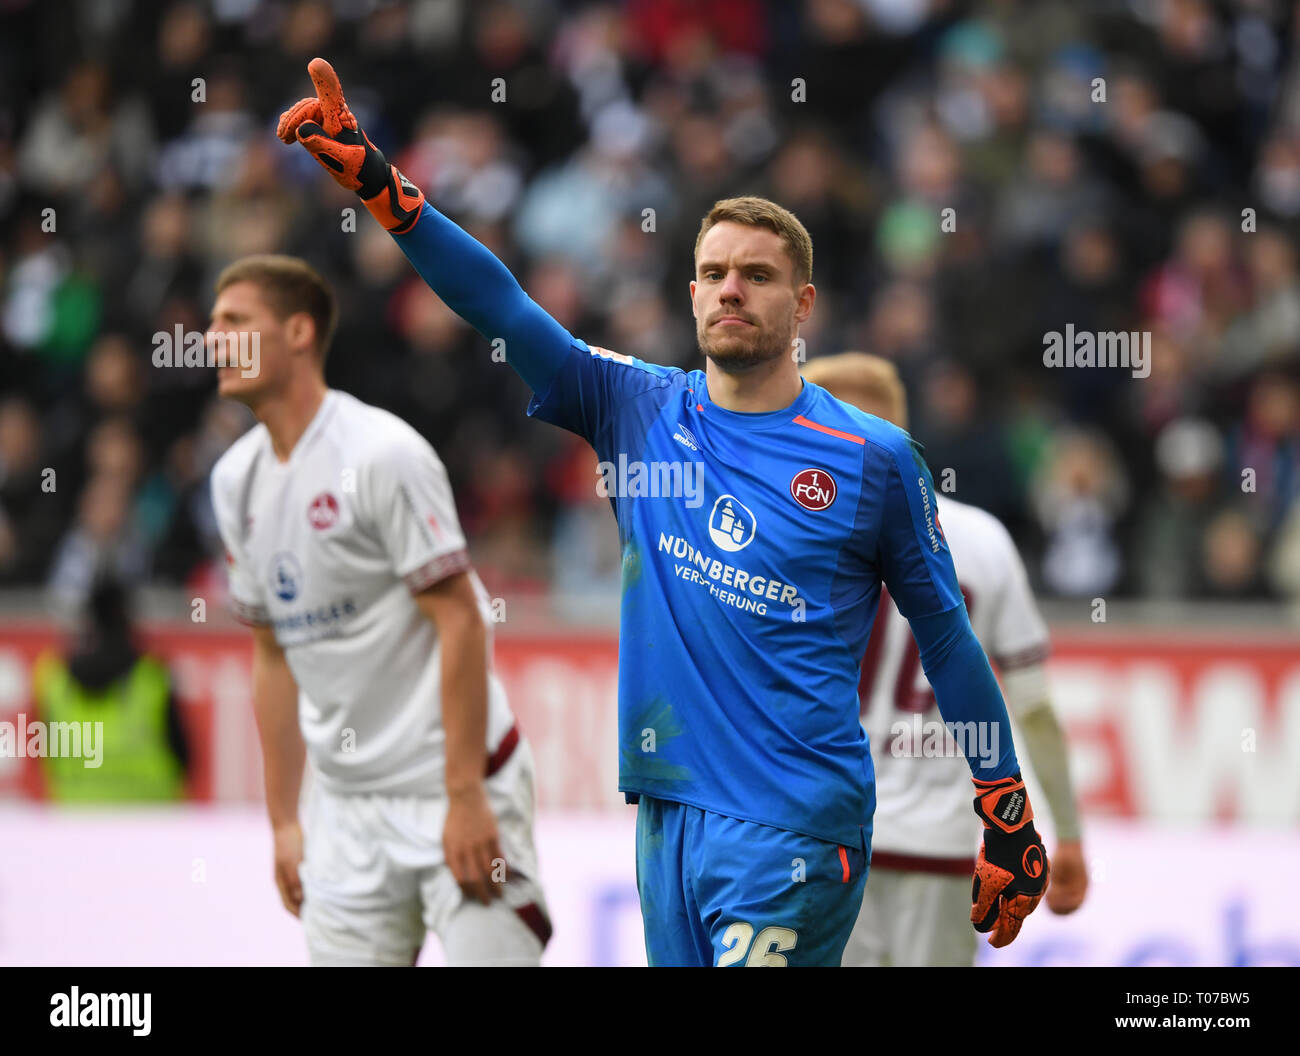 17 March 2019, Hessen, Frankfurt/Main: Soccer: Bundesliga, Eintracht Frankfurt - 1st FC Nuremberg, 26th matchday in the Commerzbank Arena. Nuremberg goalkeeper Christian Mathenia in action. Photo: Arne Dedert/dpa - IMPORTANT NOTE: In accordance with the requirements of the DFL Deutsche Fußball Liga or the DFB Deutscher Fußball-Bund, it is prohibited to use or have used photographs taken in the stadium and/or the match in the form of sequence images and/or video-like photo sequences. Stock Photo